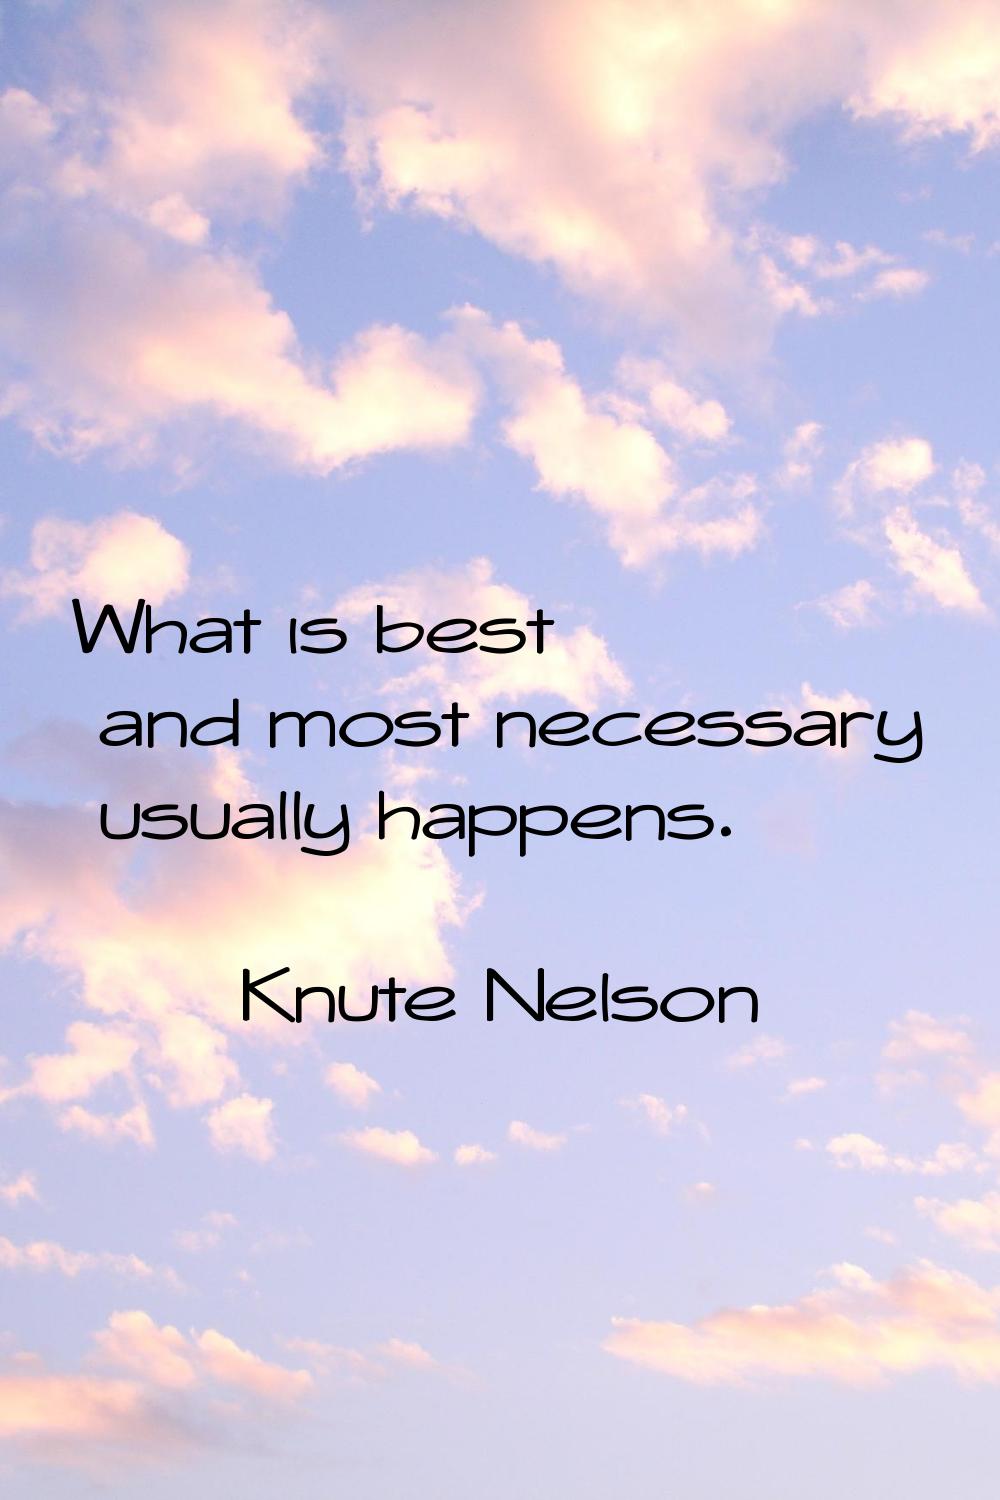 What is best and most necessary usually happens.